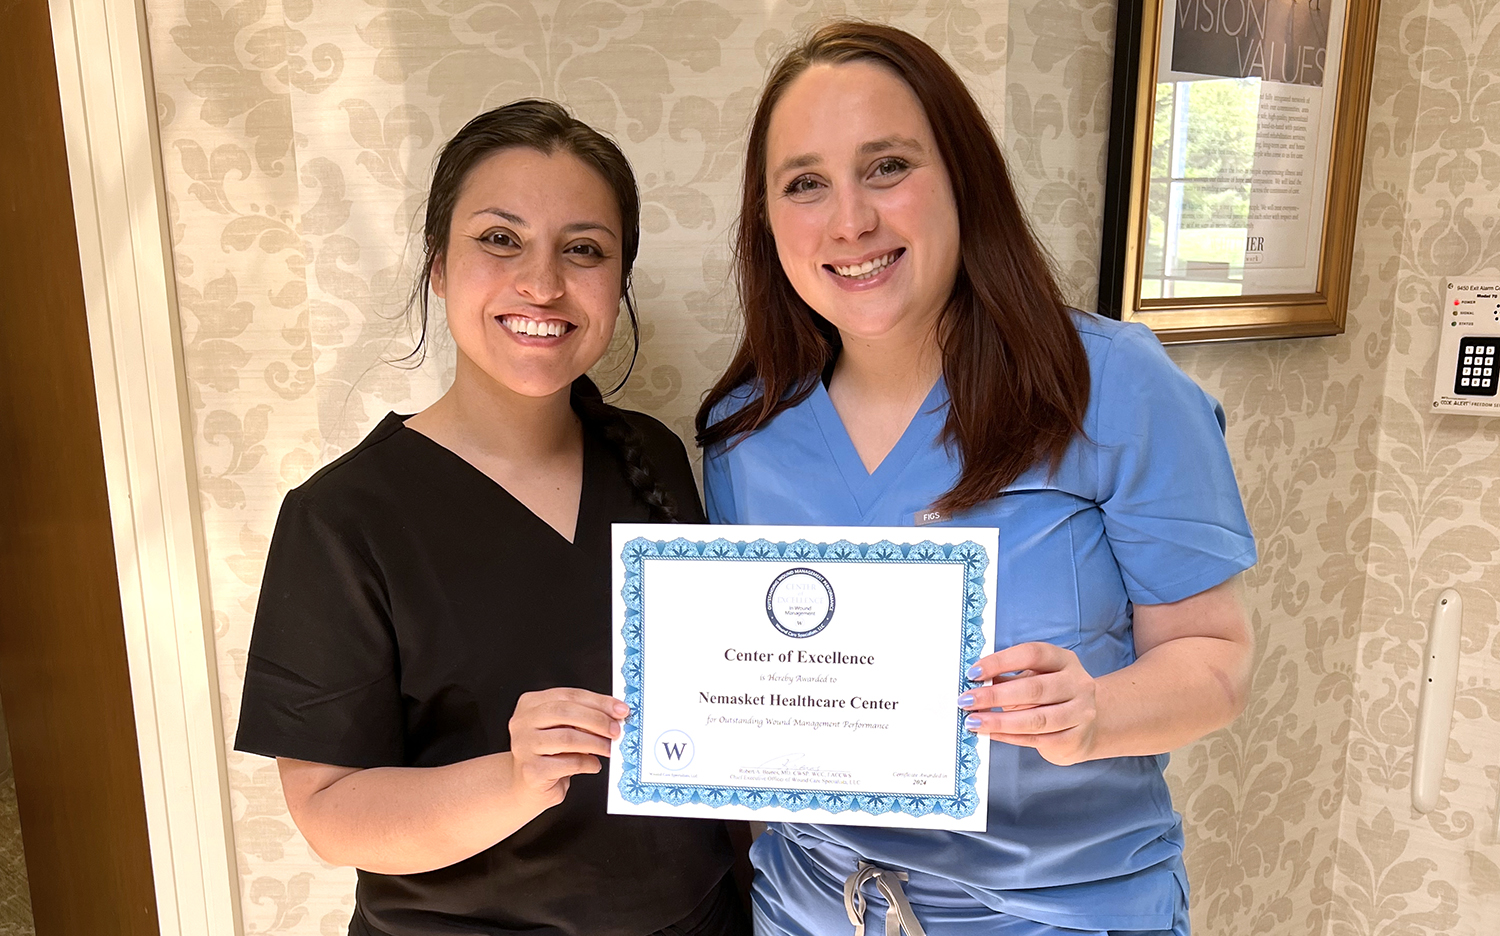 Nemasket Healthcare Center has received a “Center of Excellence in Wound Management” award for outstanding wound management performance.